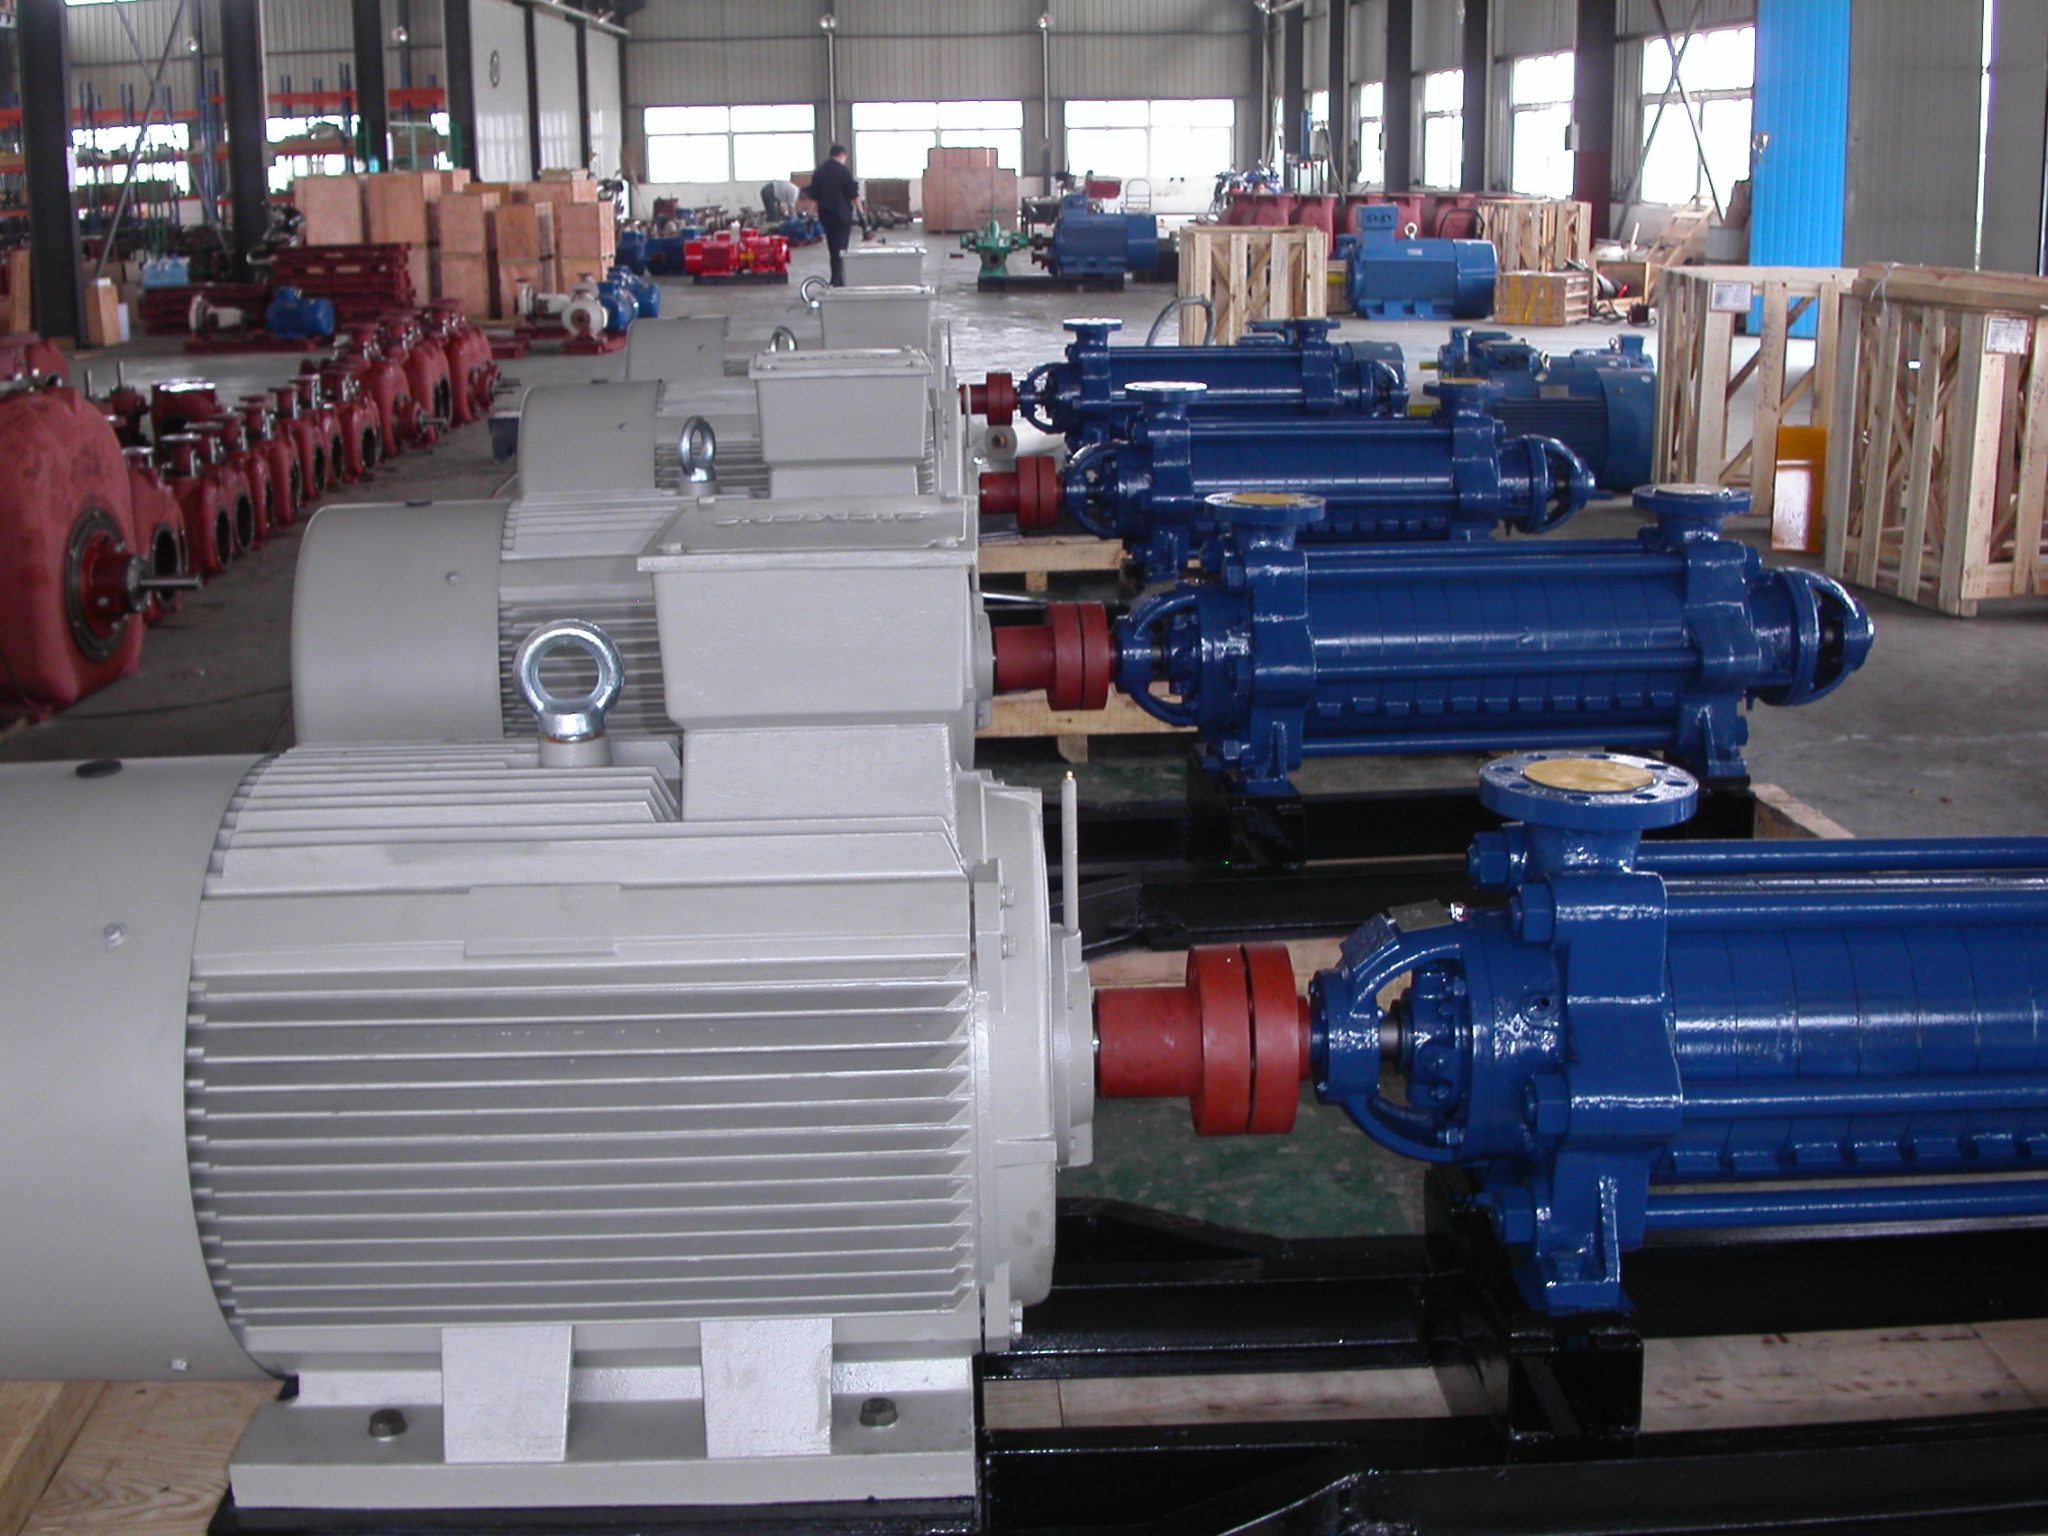 Image of pumps in a factory